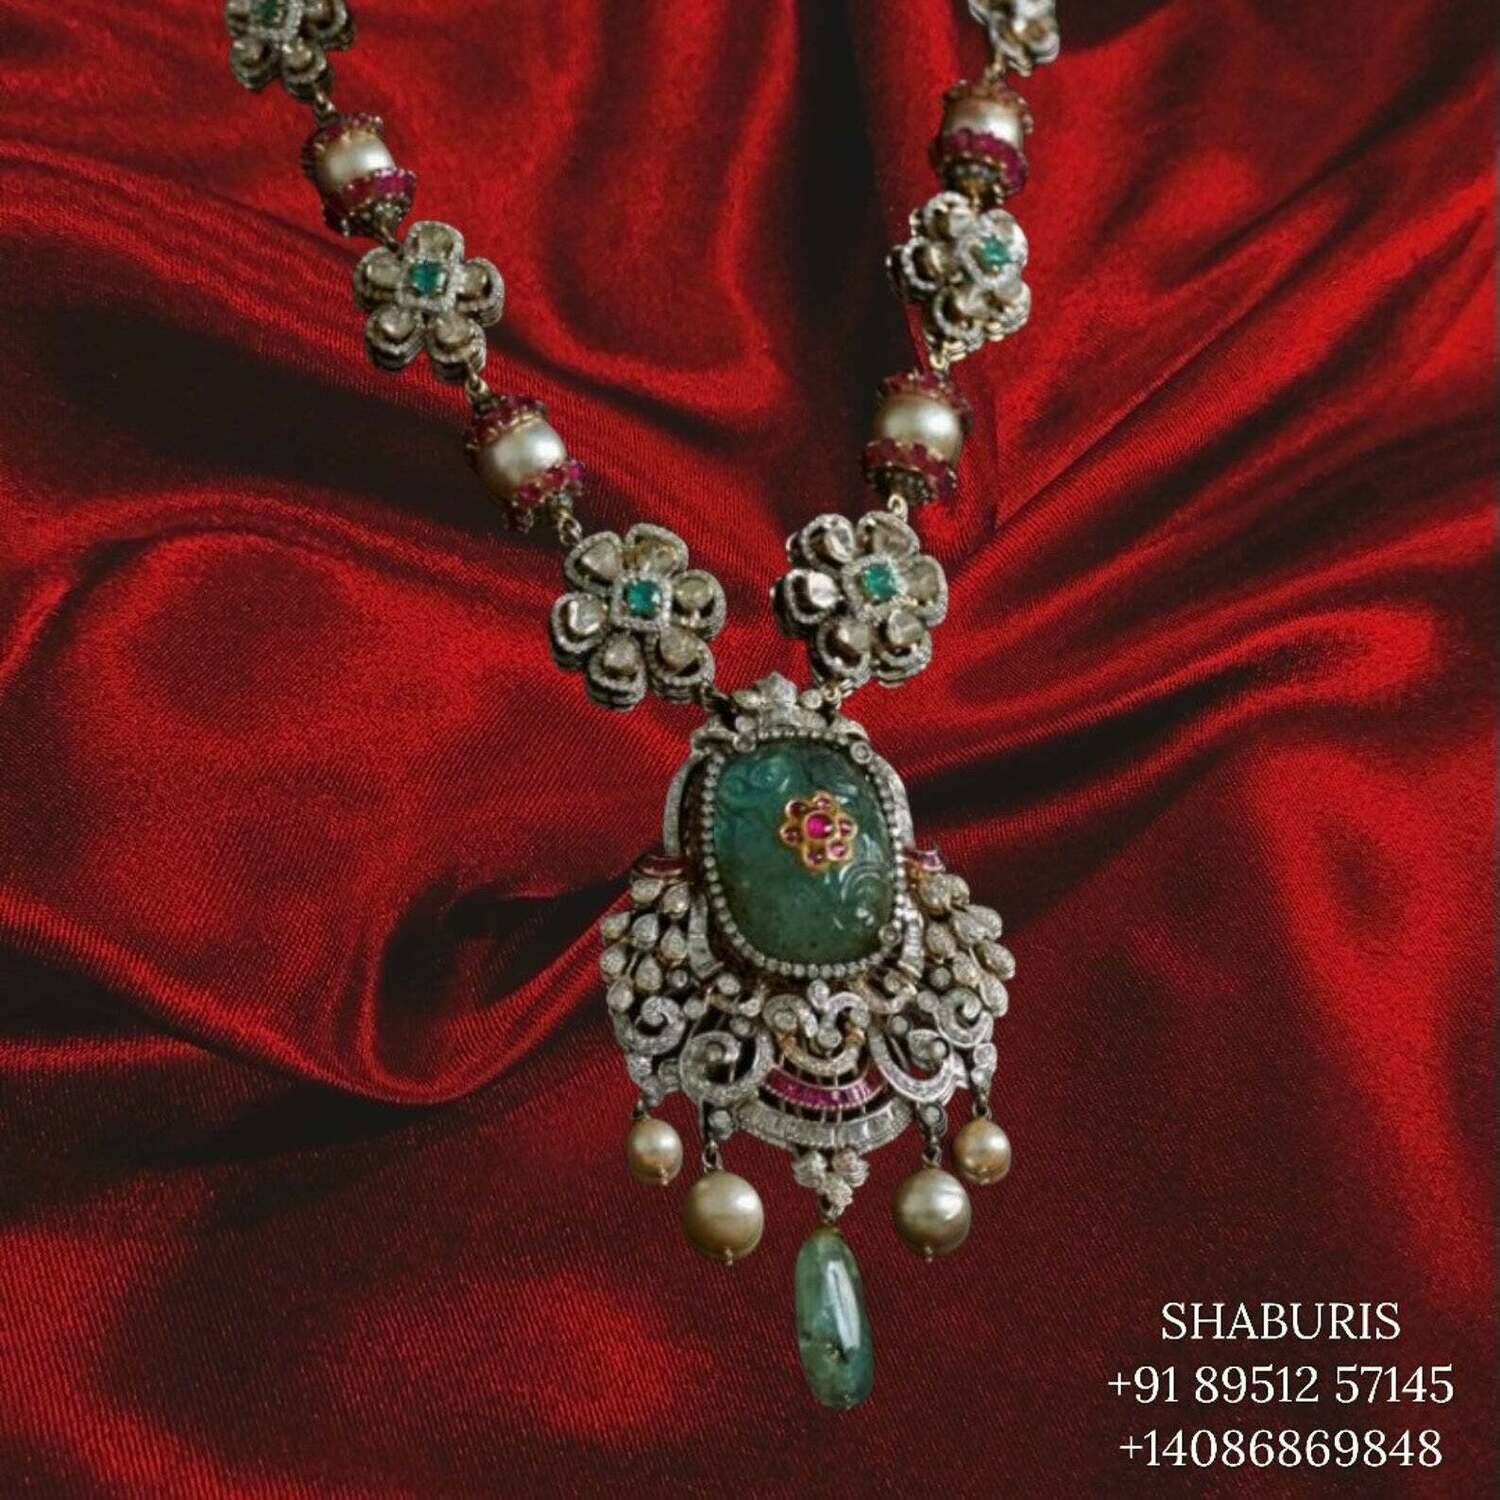 Pure Silver jewelry Indian ,Moisanite pendant,Pearl Necklace,Indian Polki Diamond ,Indian gold Jewelry designs moissanite jewelry-SHABURIS